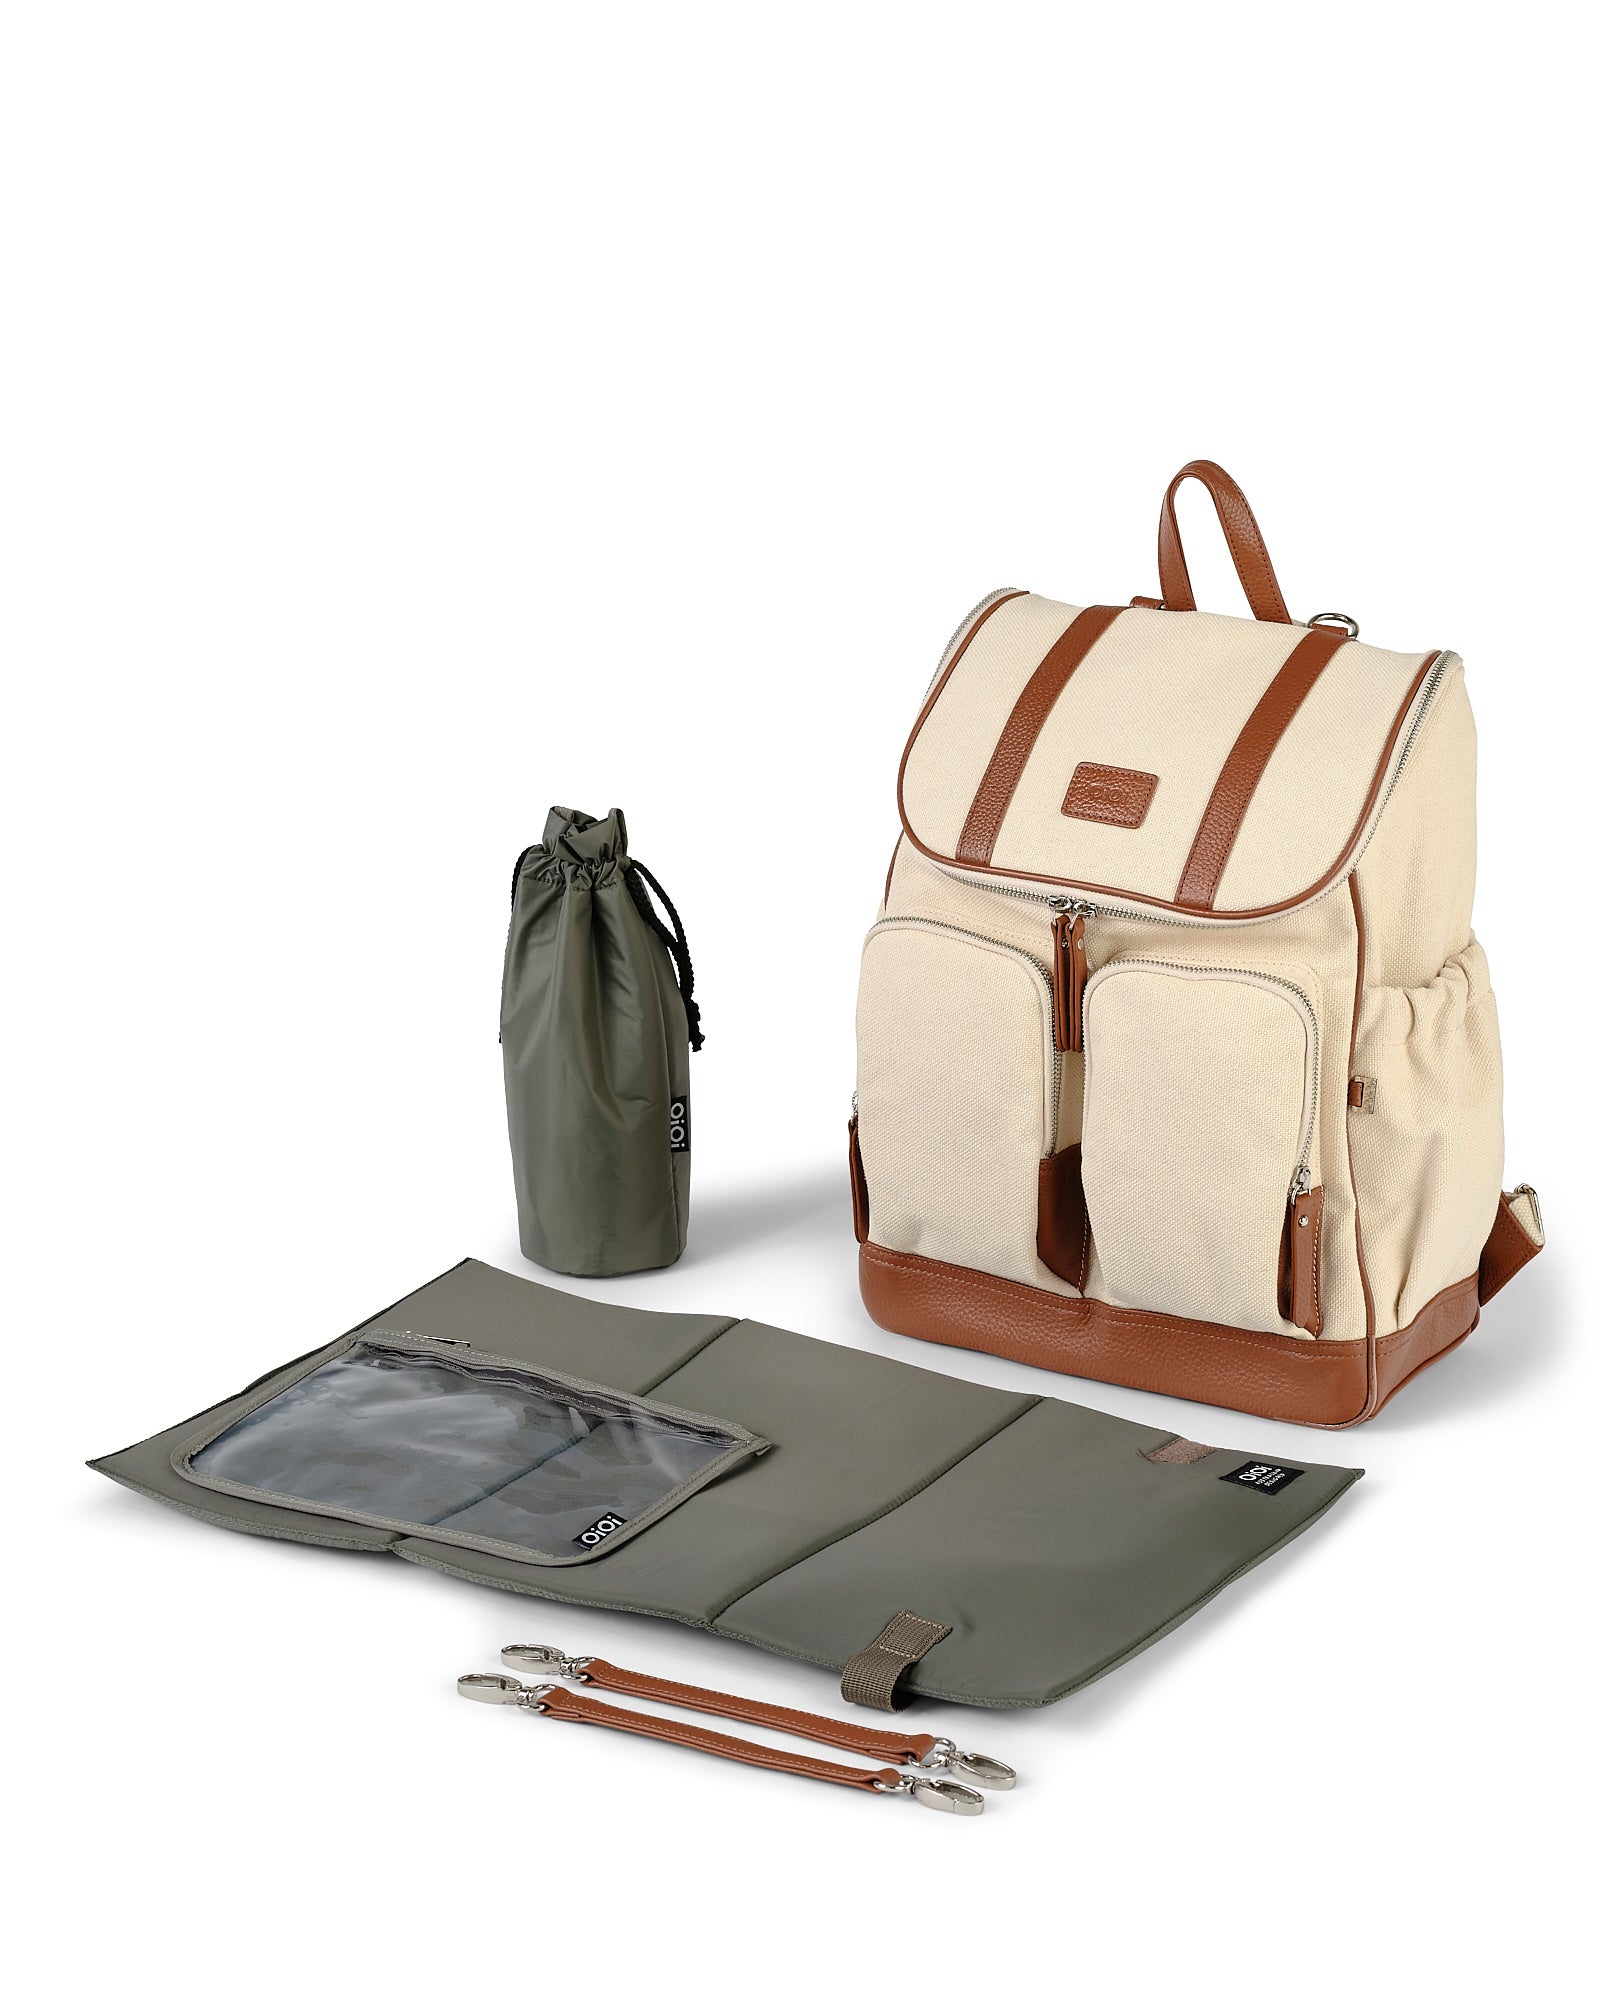 OiOi Natural Canvas Backpack - Chestnut Trim